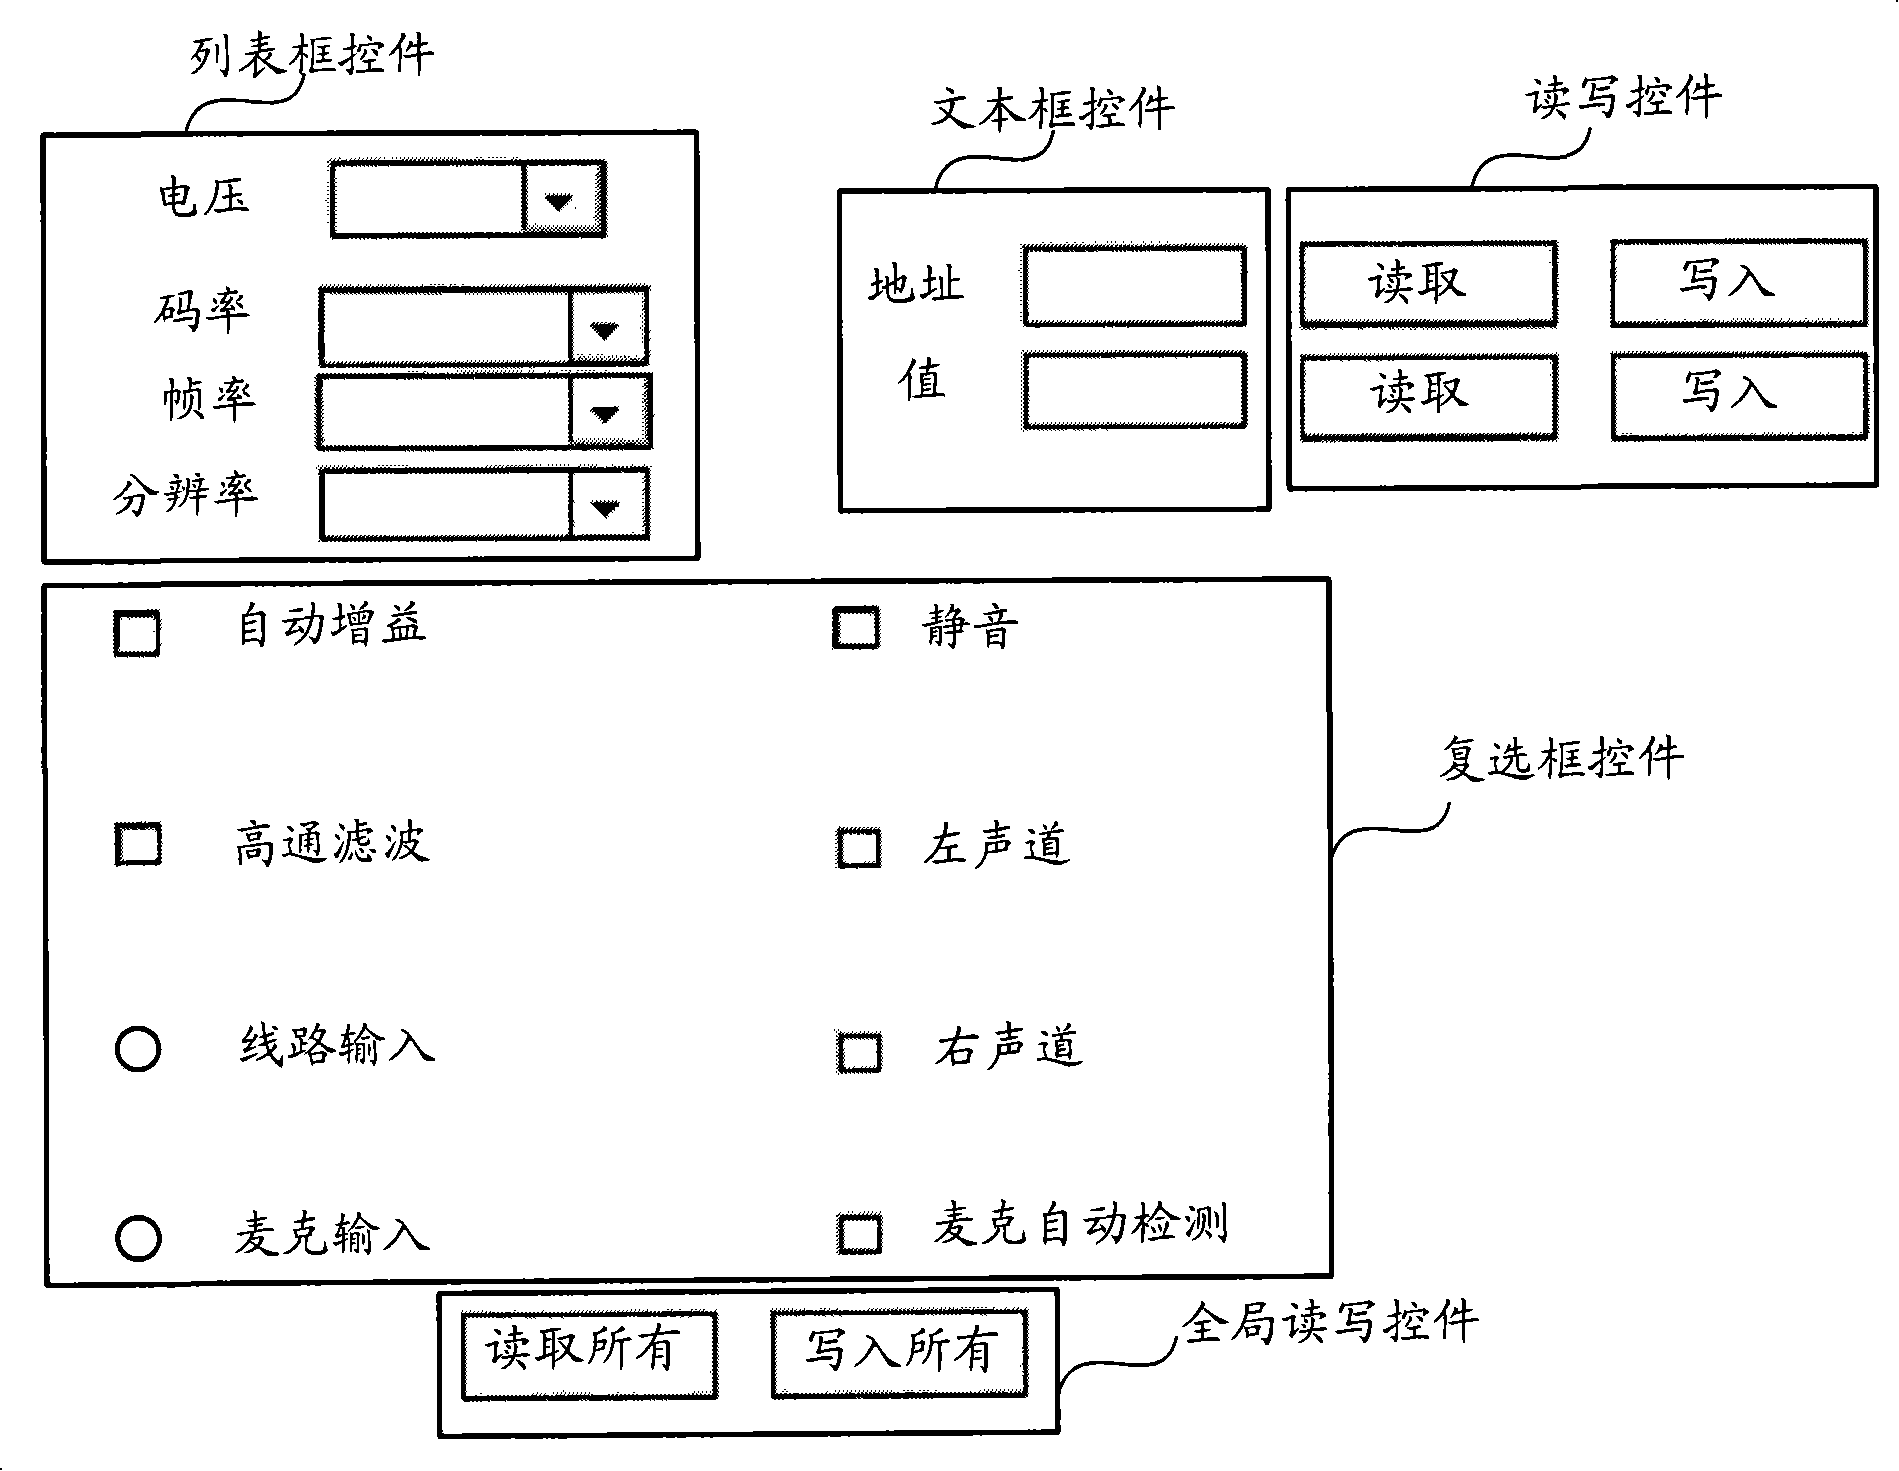 Graphical user interface creating method and apparatus